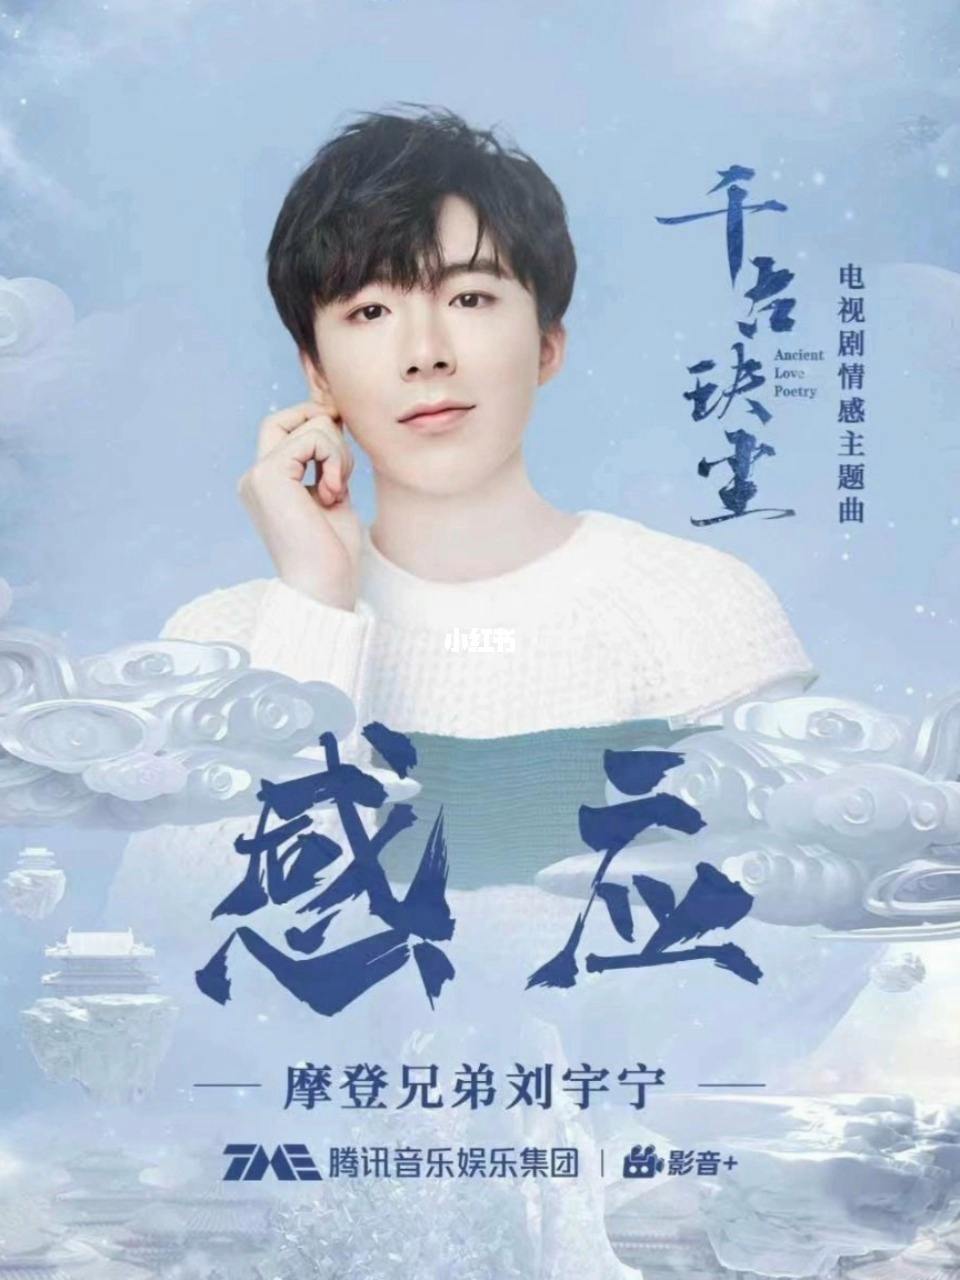 Induction感应(Gan Ying) Ancient Love Poetry OST By Liu Yuning刘宇宁